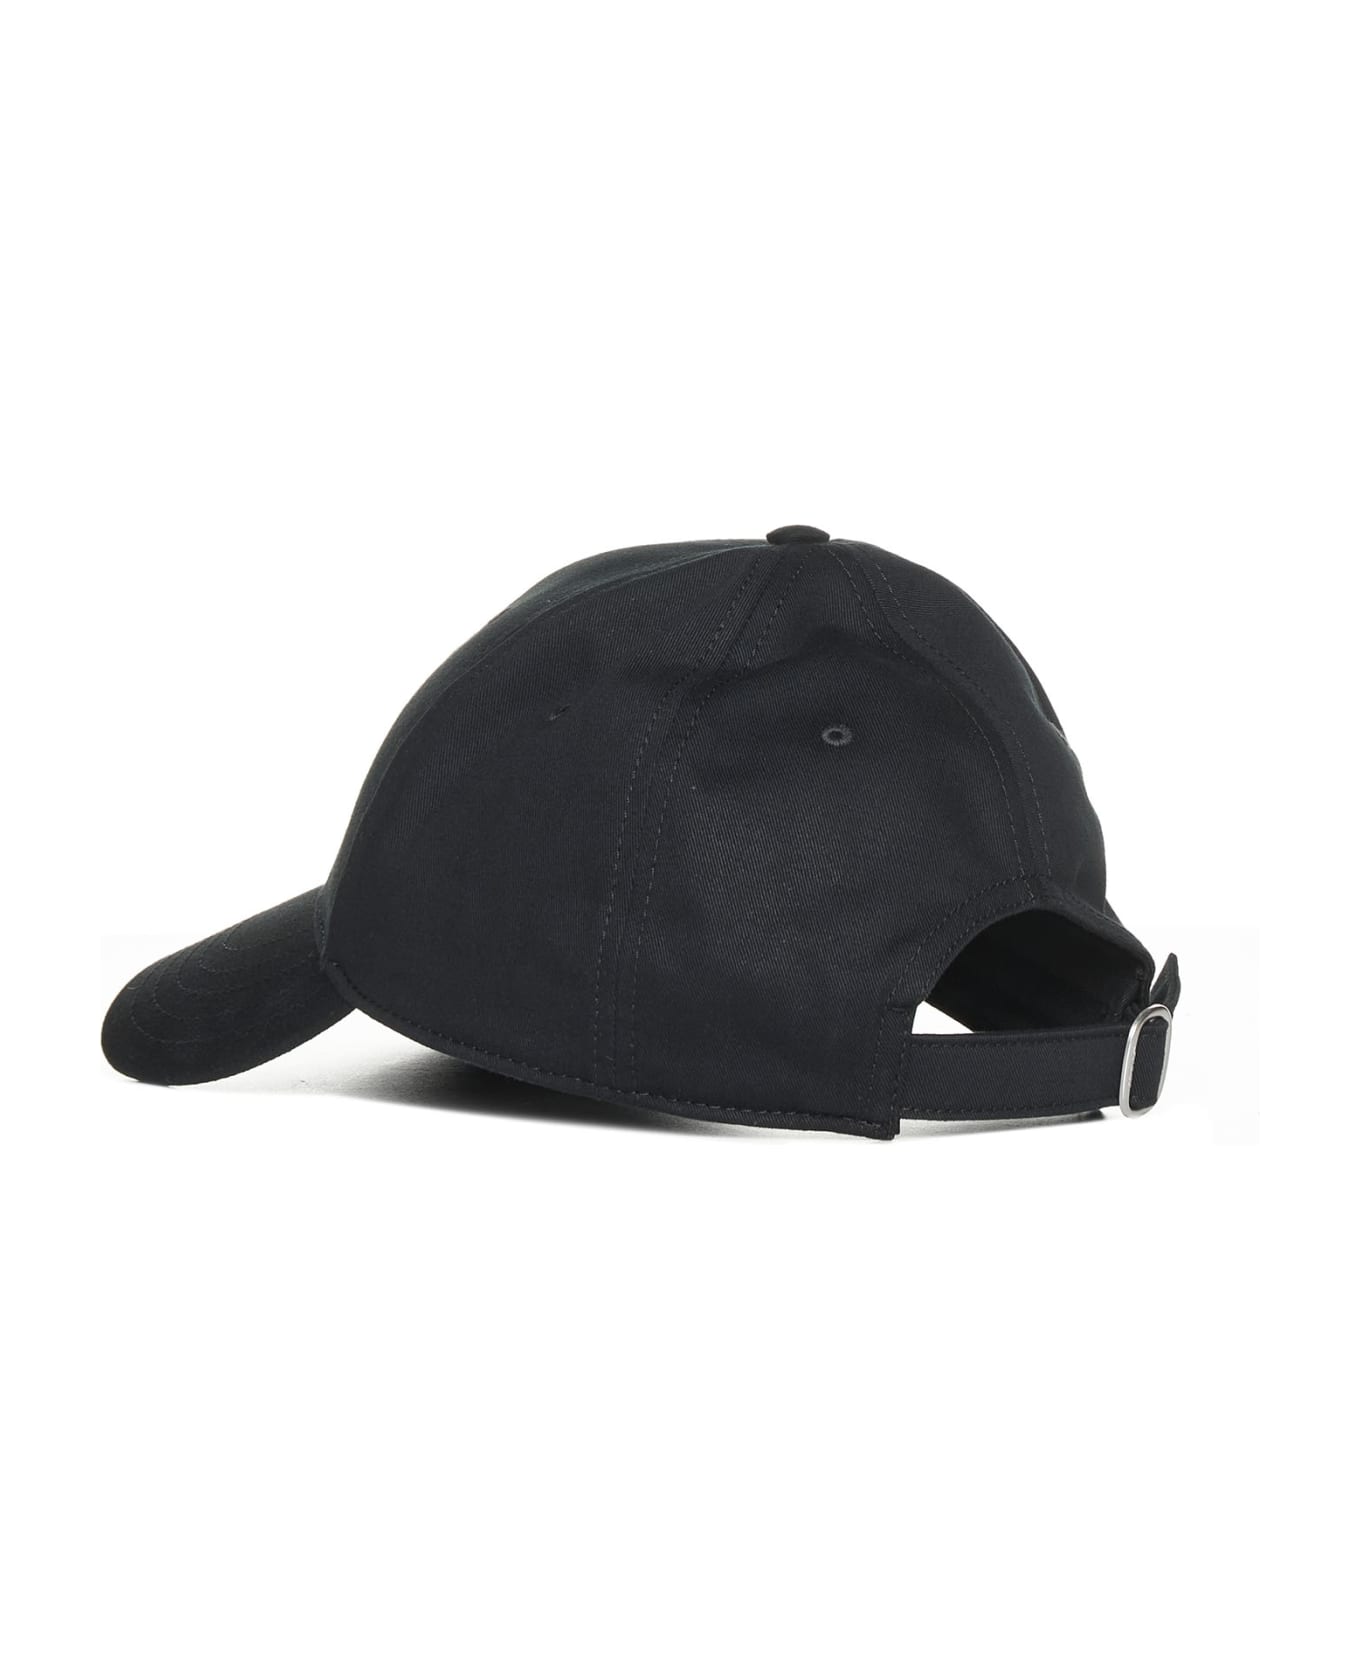 Off-White Baseball Cap With Embroidery - Black white 帽子